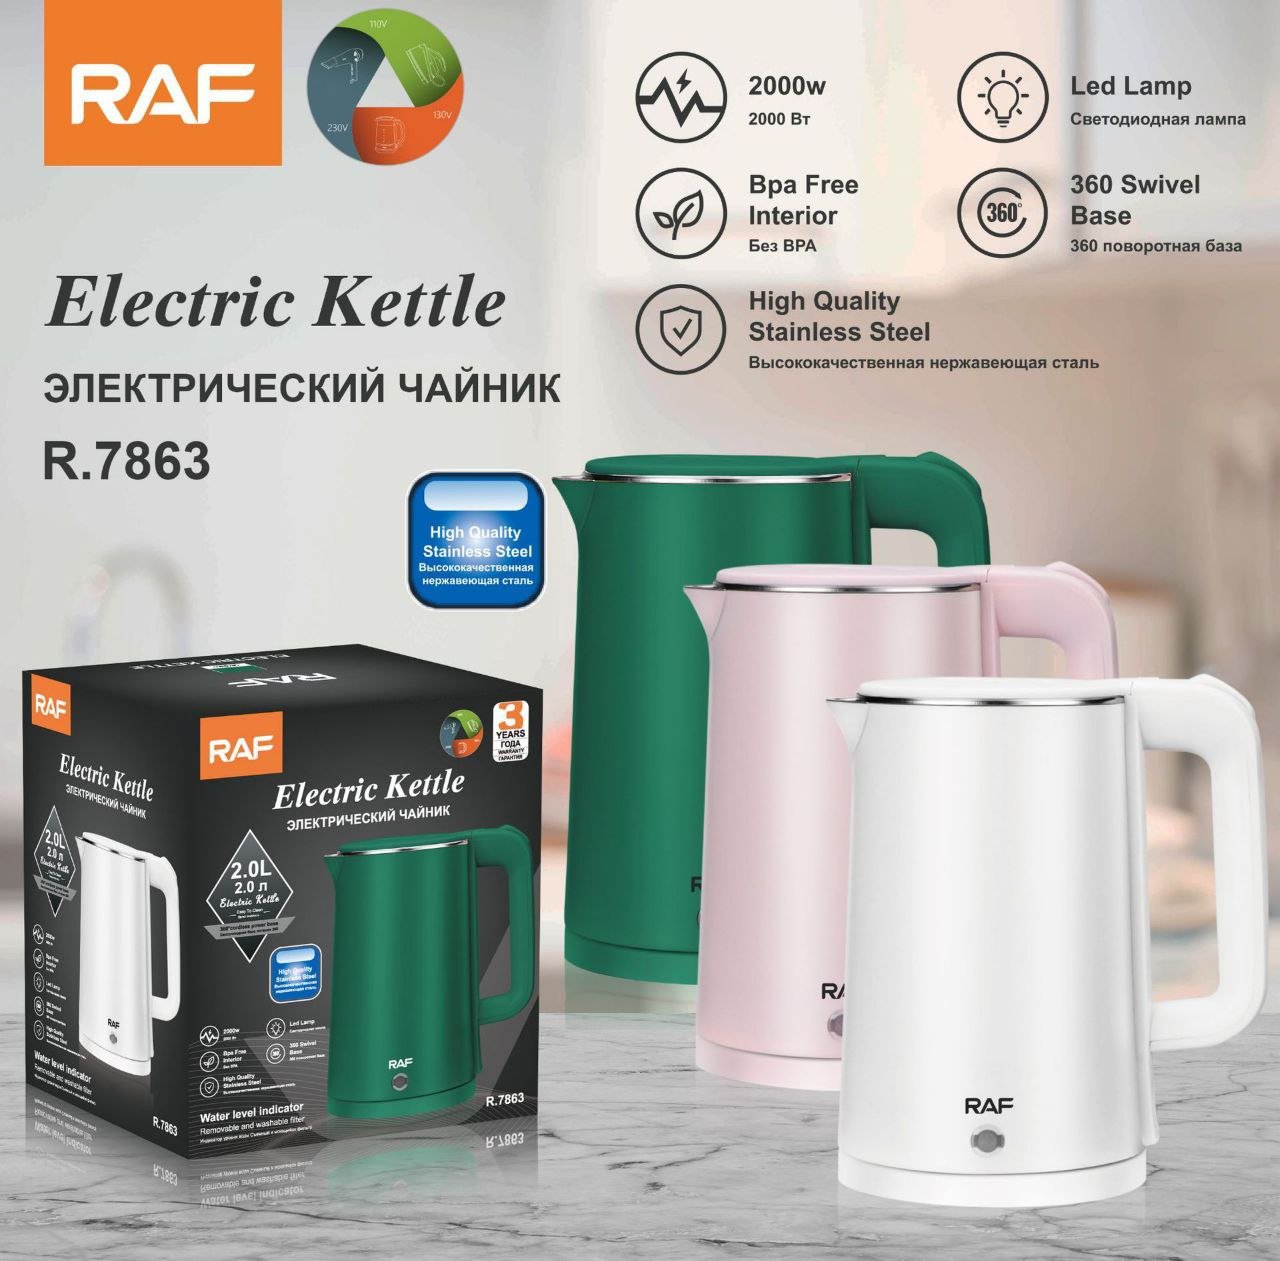 Automatic Power Off Prevent Dry Burning Kettle